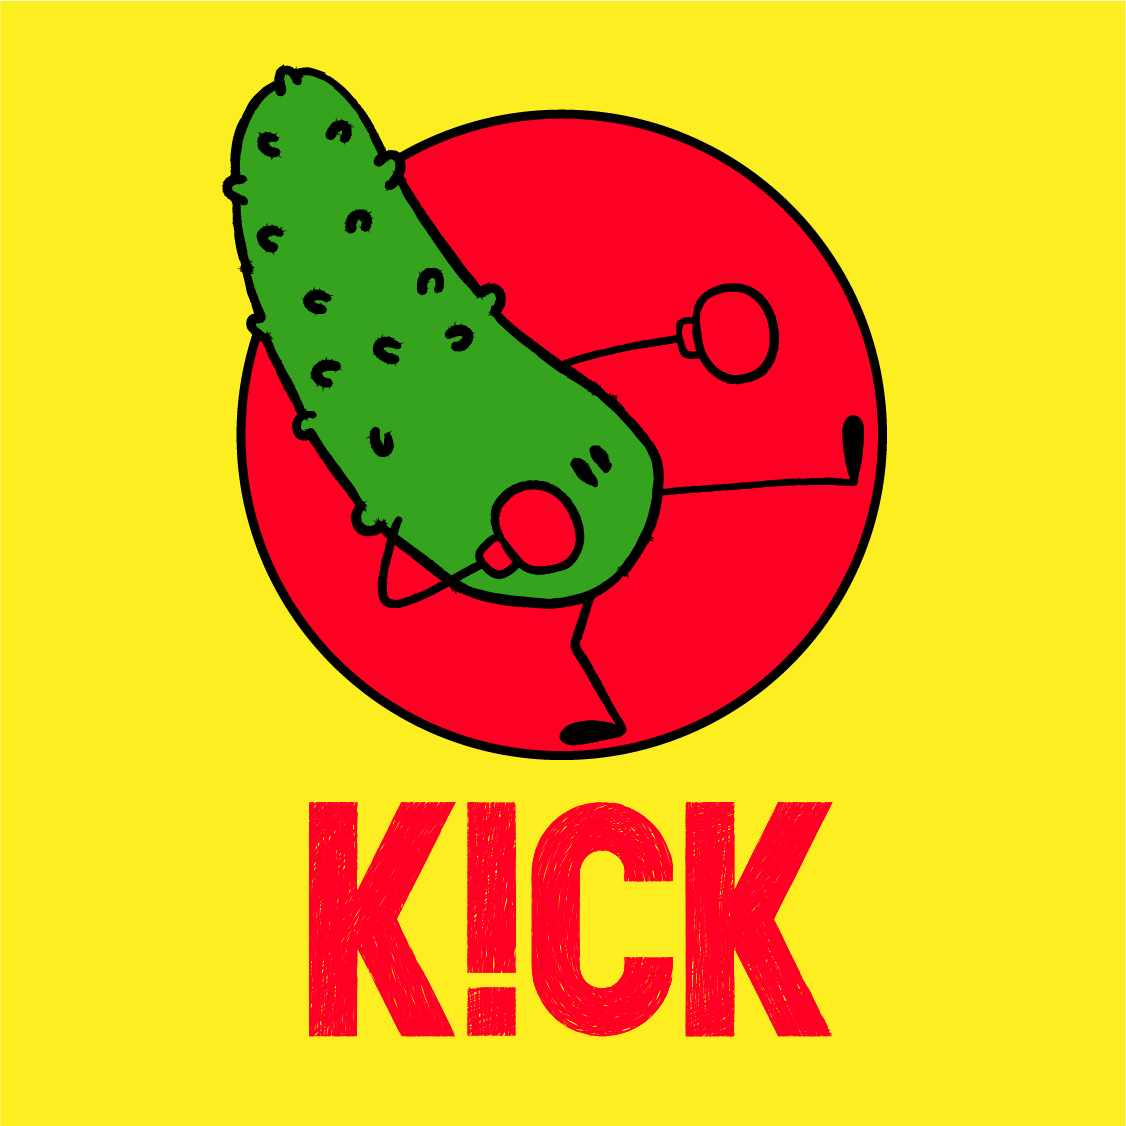 KICK! GIFs - Find & Share on GIPHY